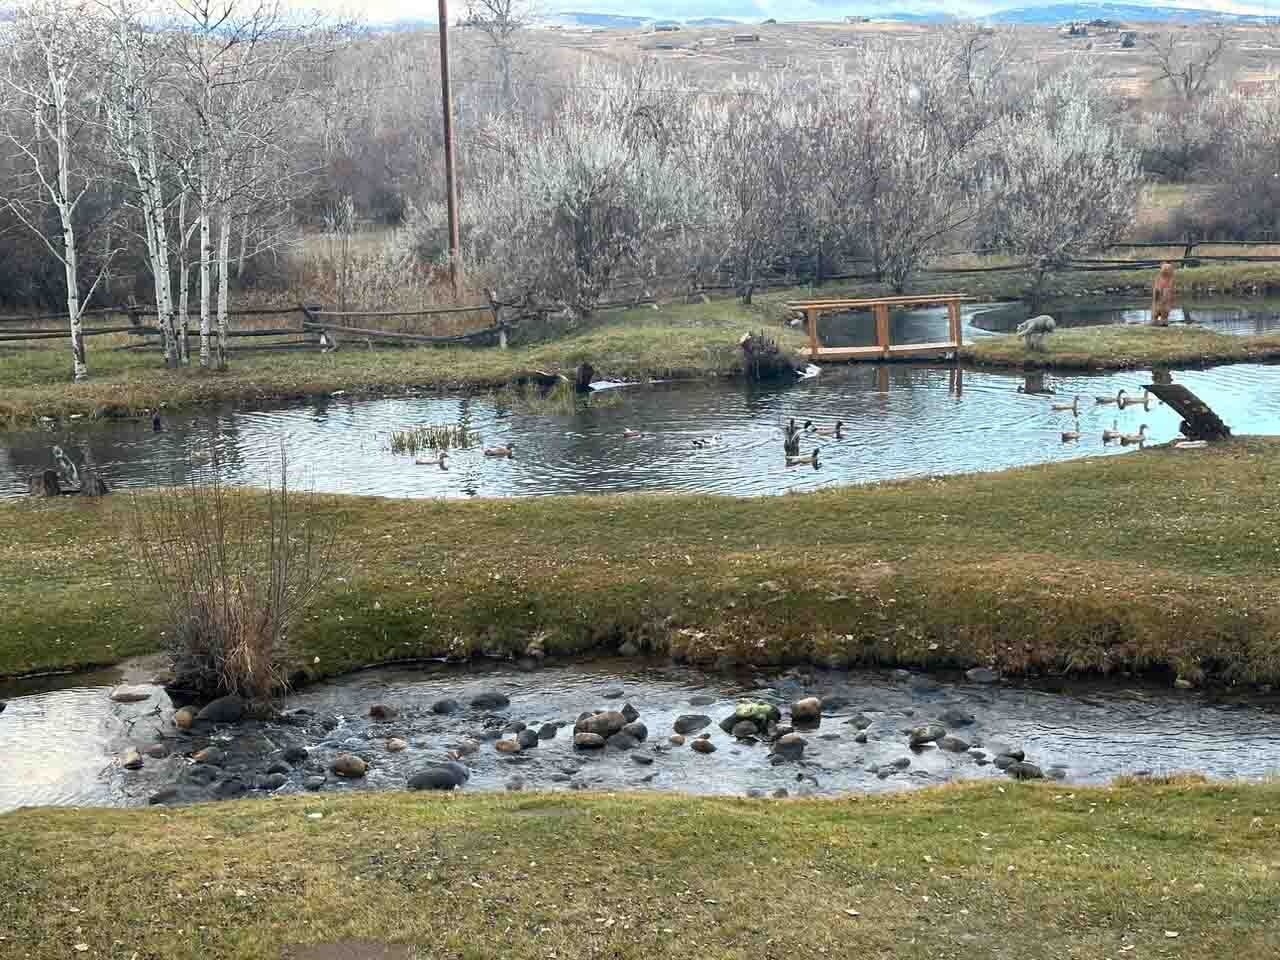 On Wednesday, the grass was green and the ducks were having fun in the ponds.